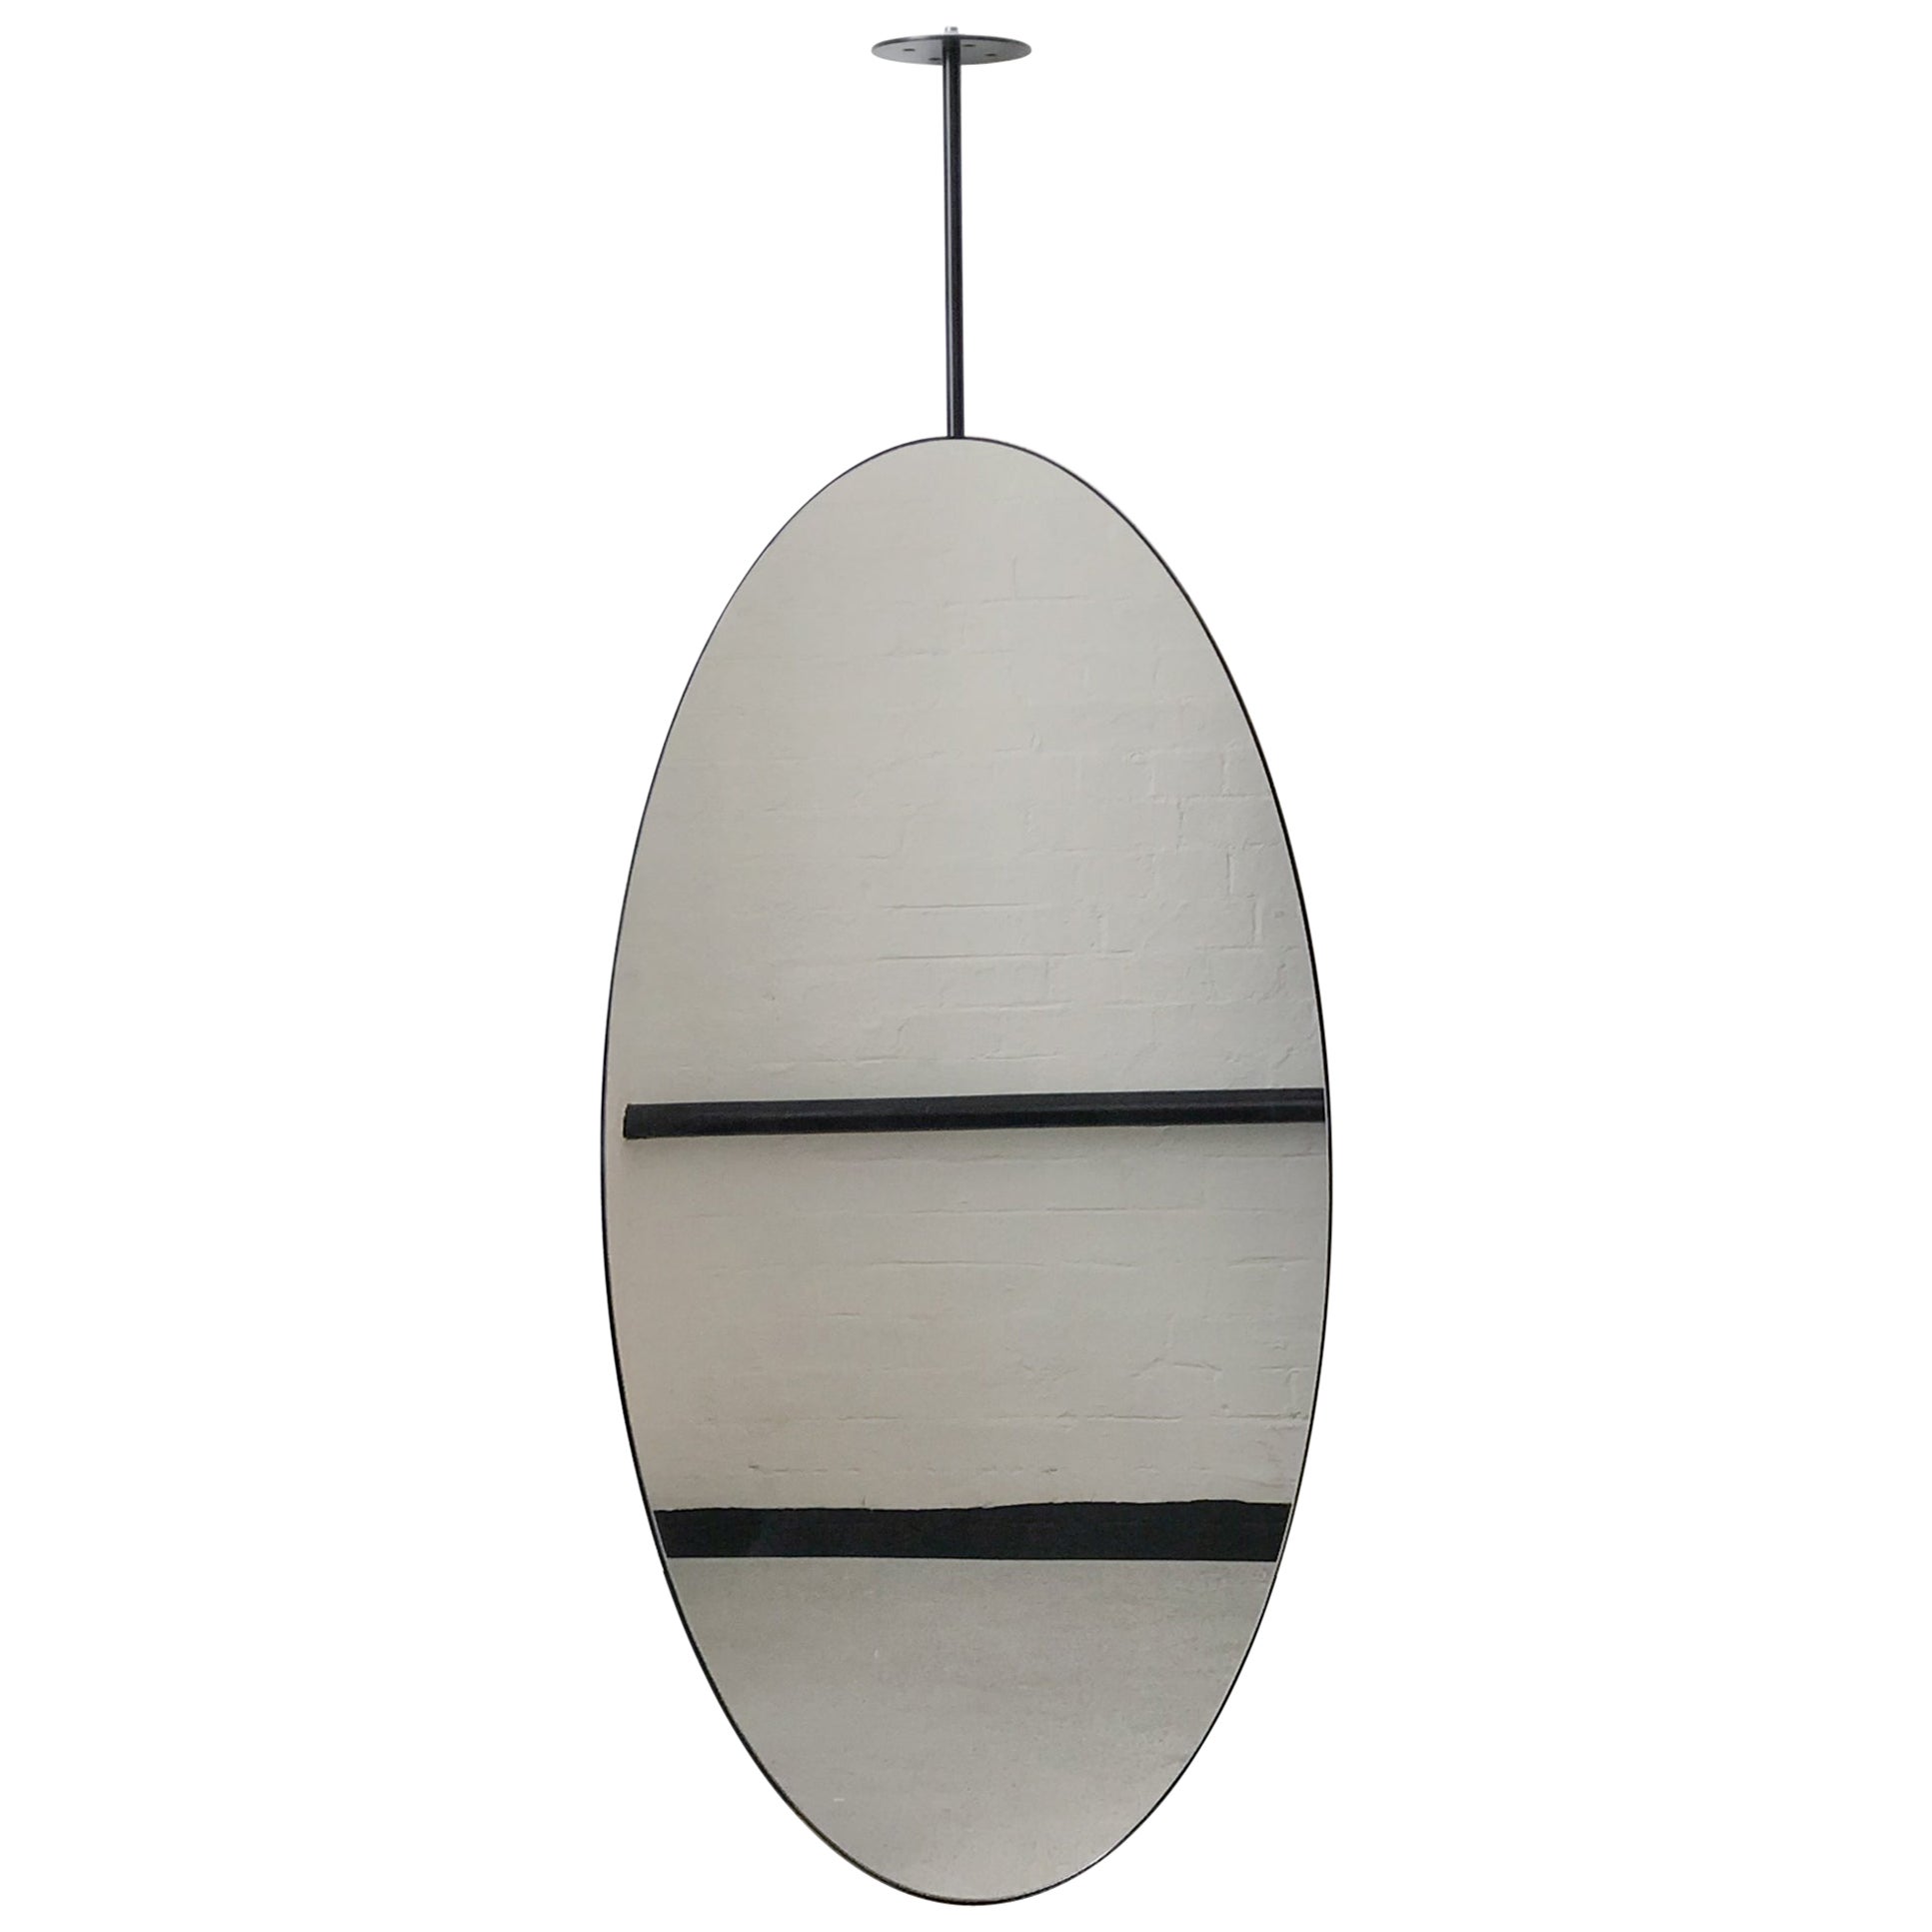 Ovalis Ceiling Suspended Oval Shaped Mirror with Matte Black Frame For Sale